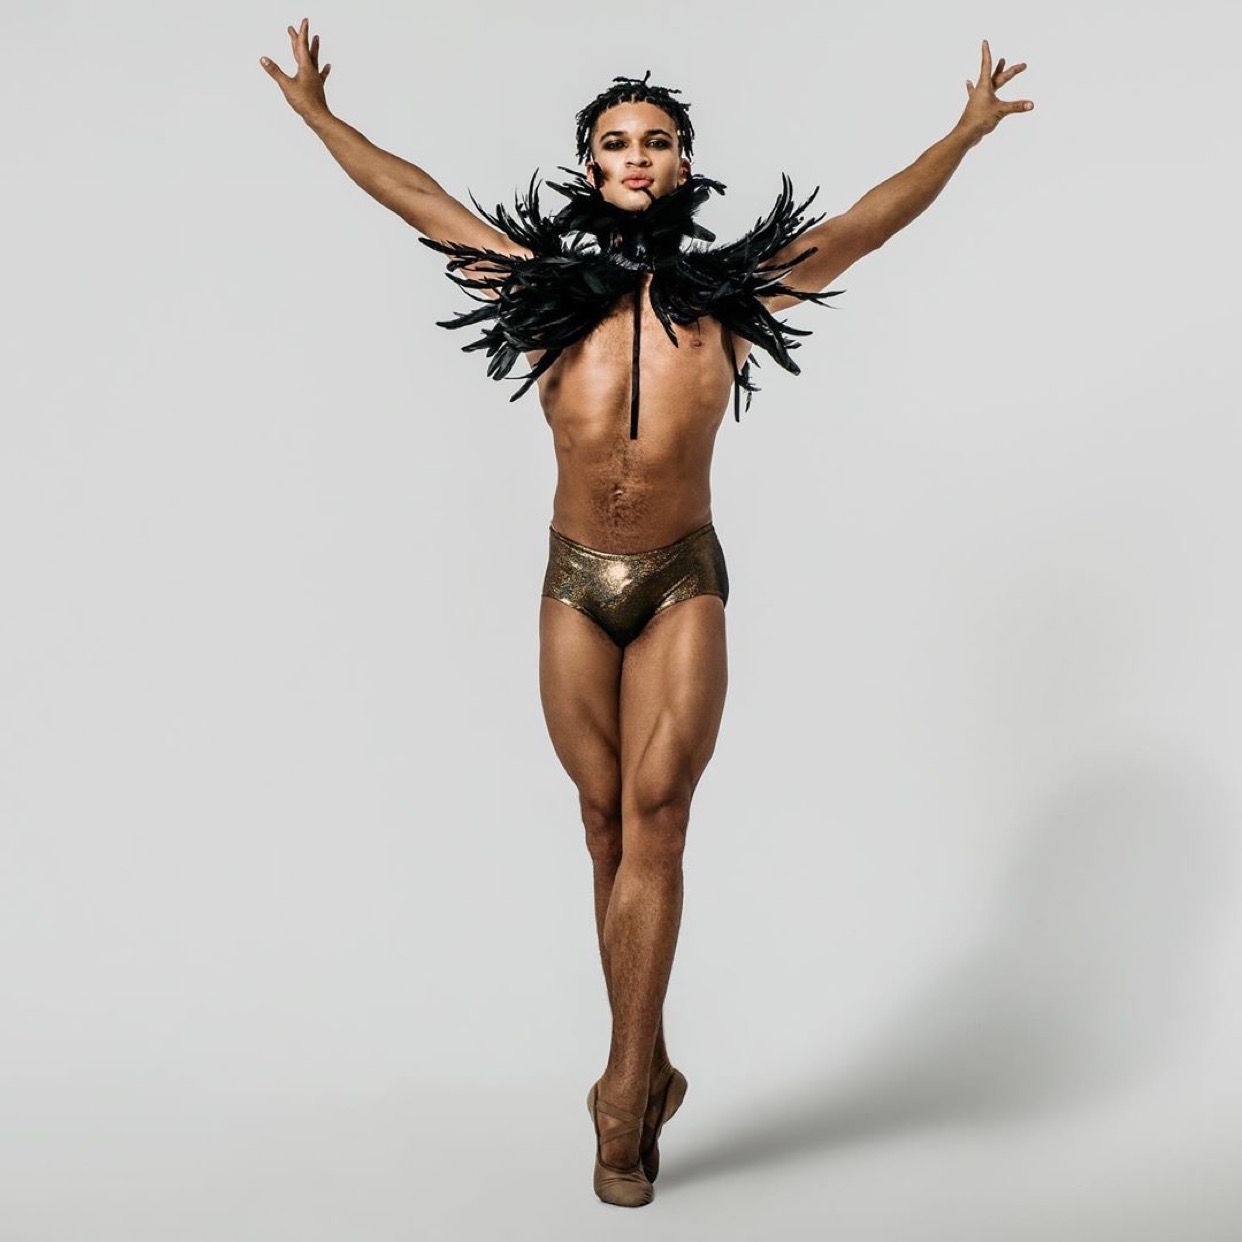 Dancer in white background wearing black feathers on shoulders and wearing ballet shoes.